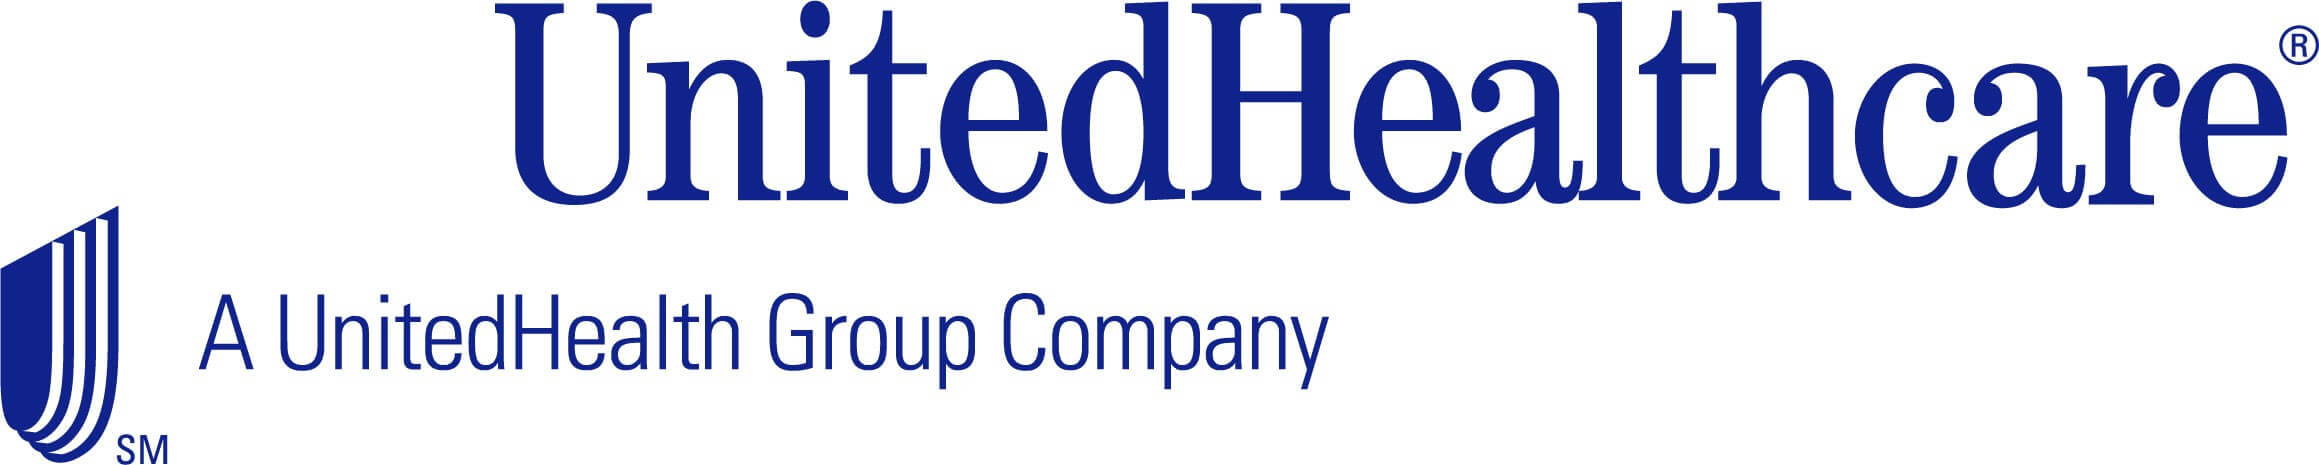 Does United Health Care Cover Rehab? Get Help Now. Check Online.